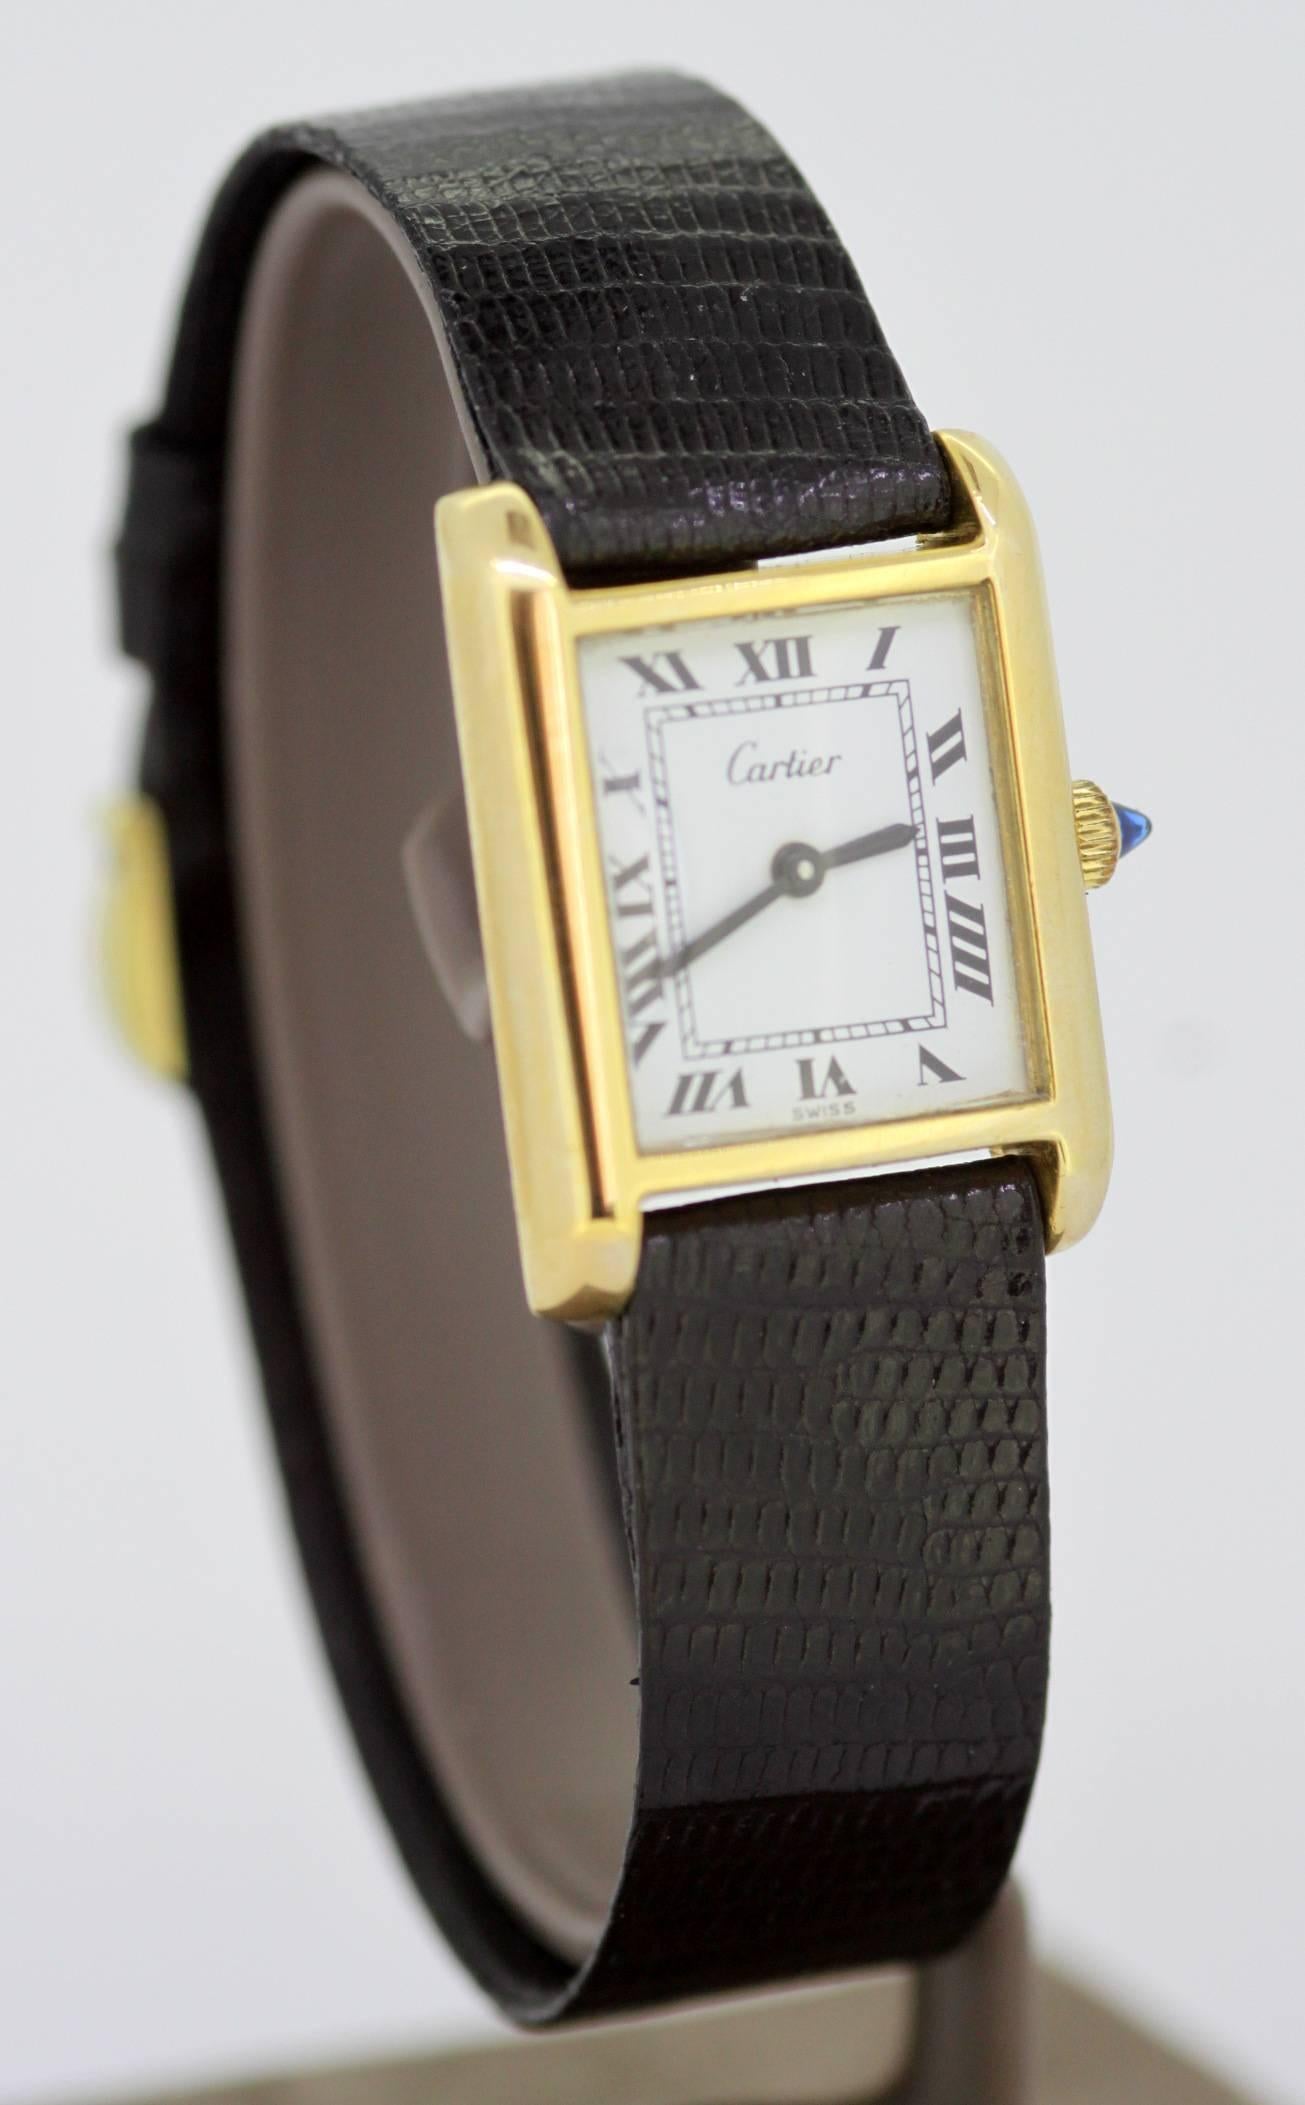 Cartier Ladies Gold Plated Manual Winding Wristwatch, C.1970's
Watch has been made in USA.

Ref : 25705 / 5512106 / 21682
Gender: Ladies
Case Size (No crown) : 28 x 22 mm
Movement: Manual Winding
Watchband Material: Original Cartier leather
Case